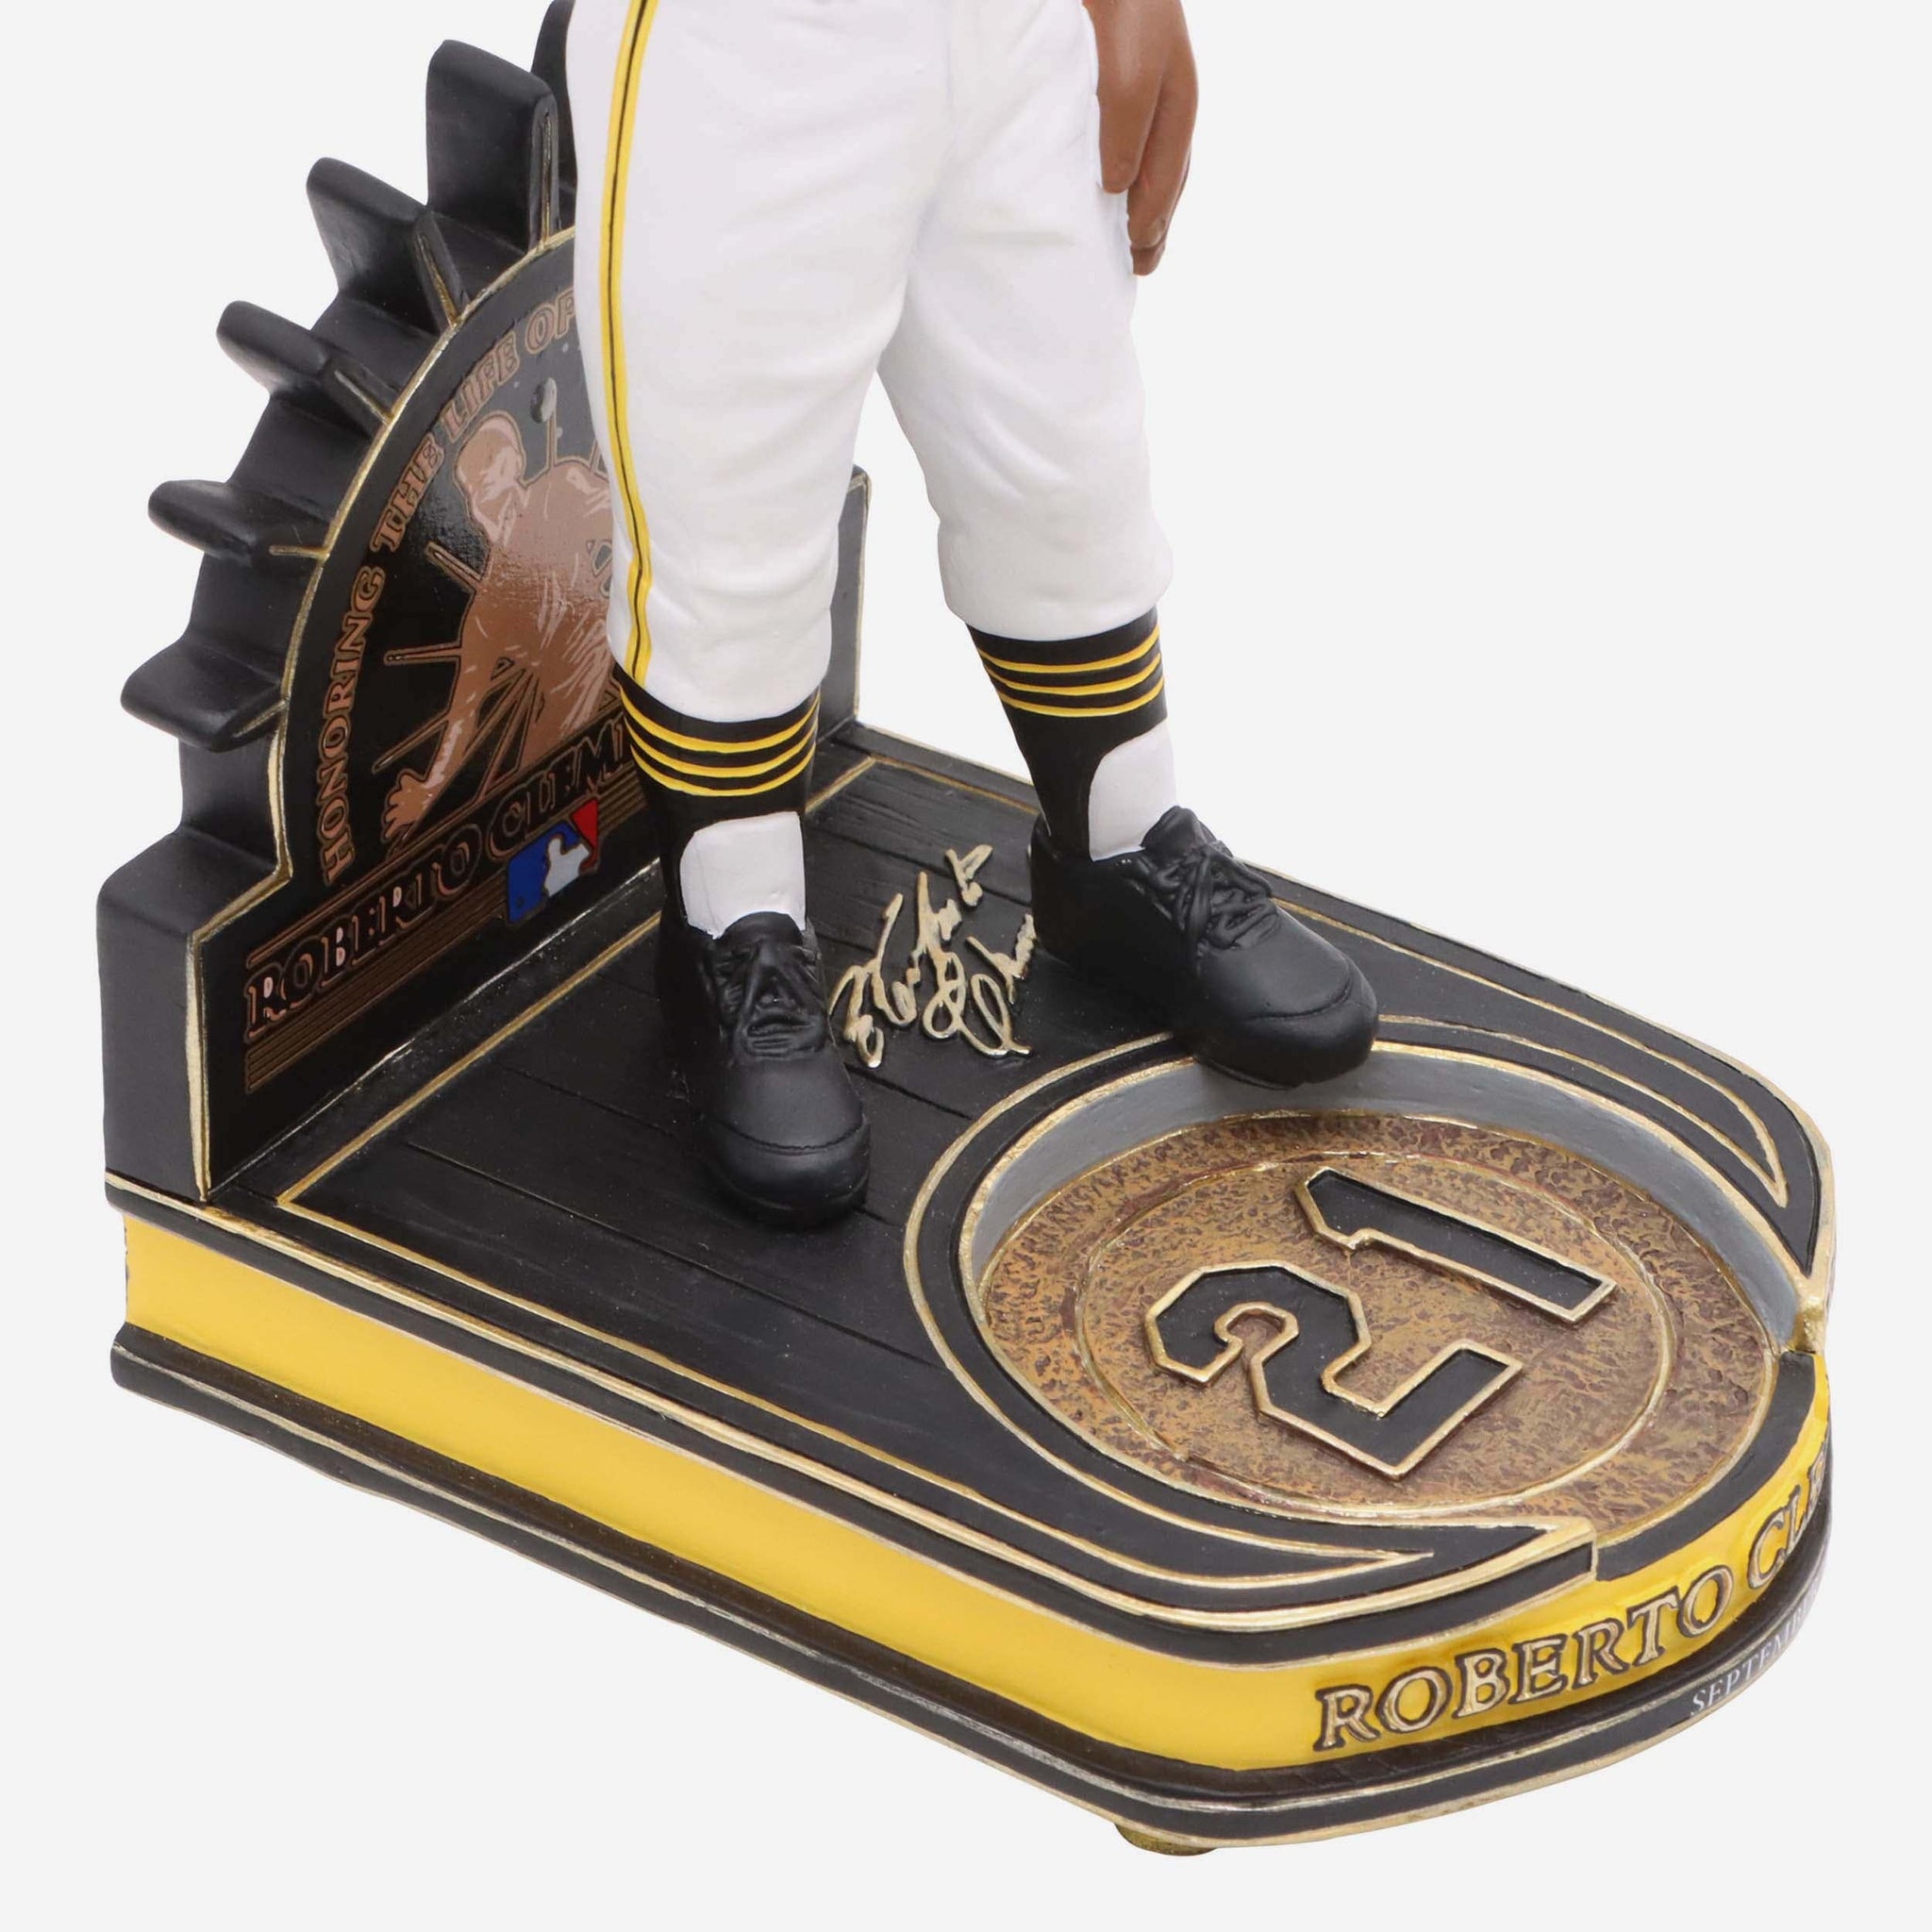 New FOCO bobblehead features legendary Pittsburgh Pirate Roberto Clemente 